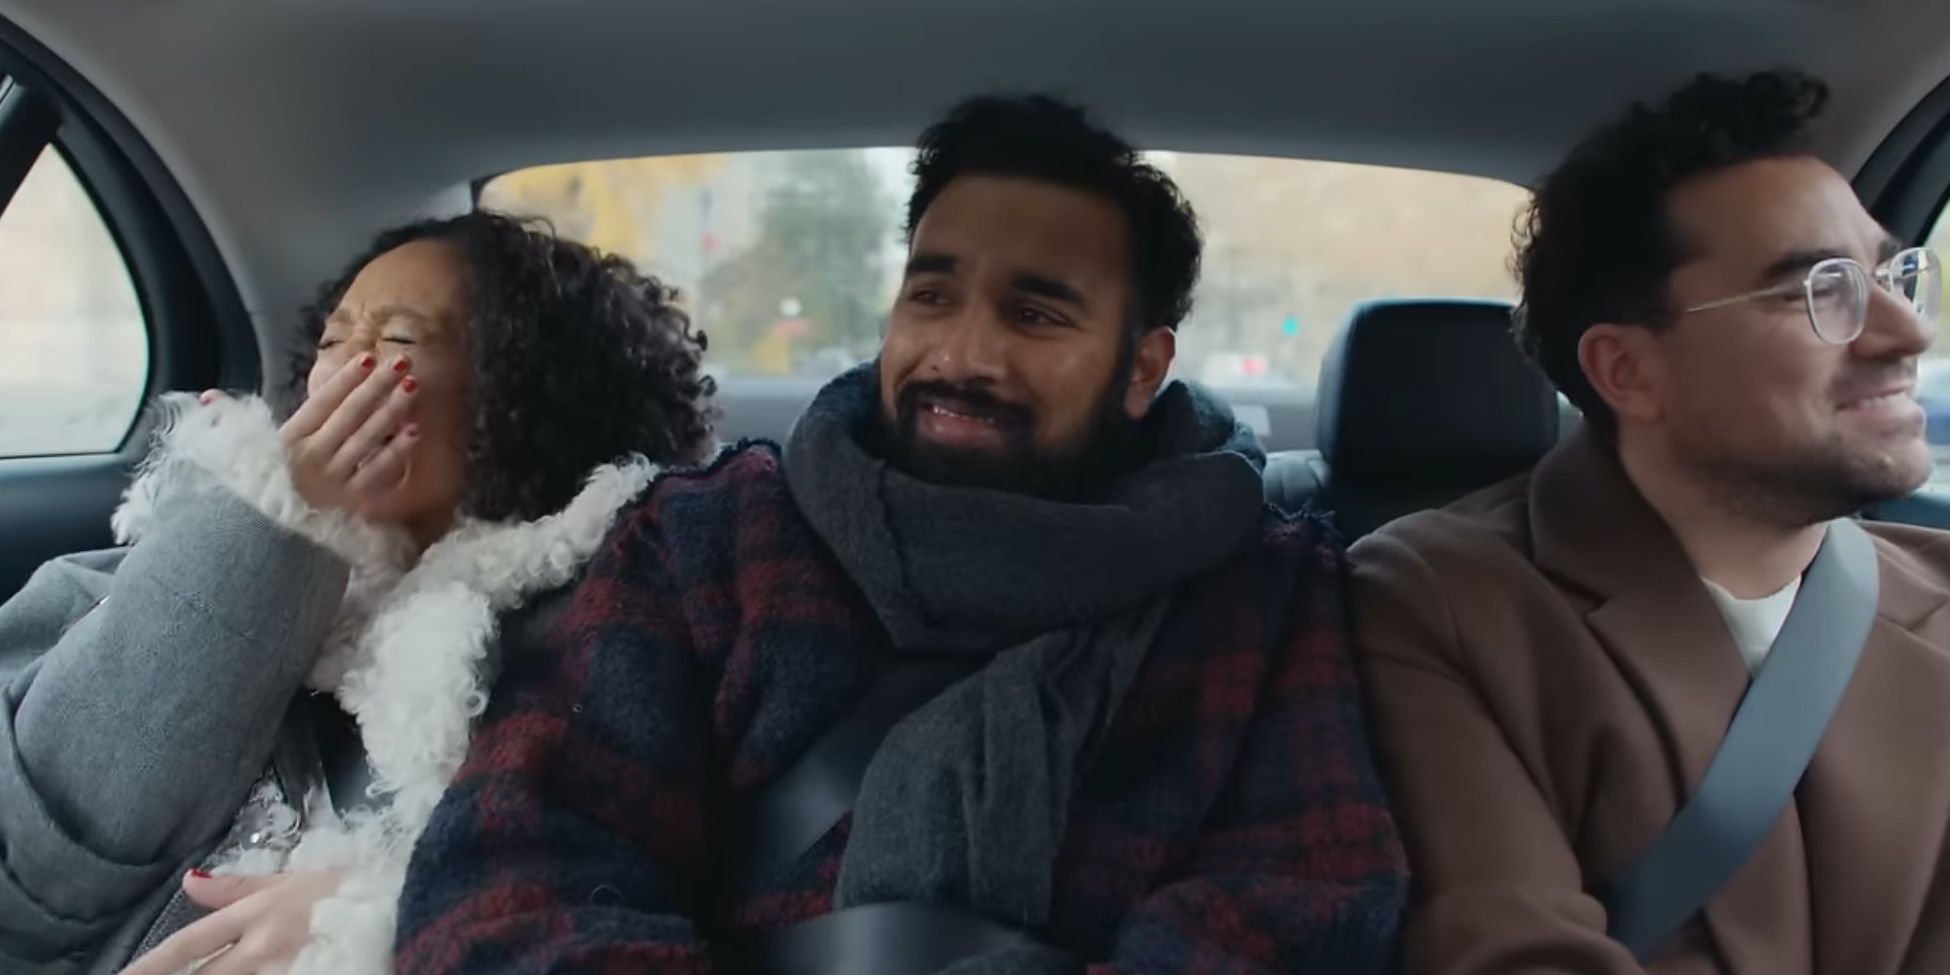 Dan Levy, Himesh Patel, and Ruth Negga in the back of a car in Good Grief